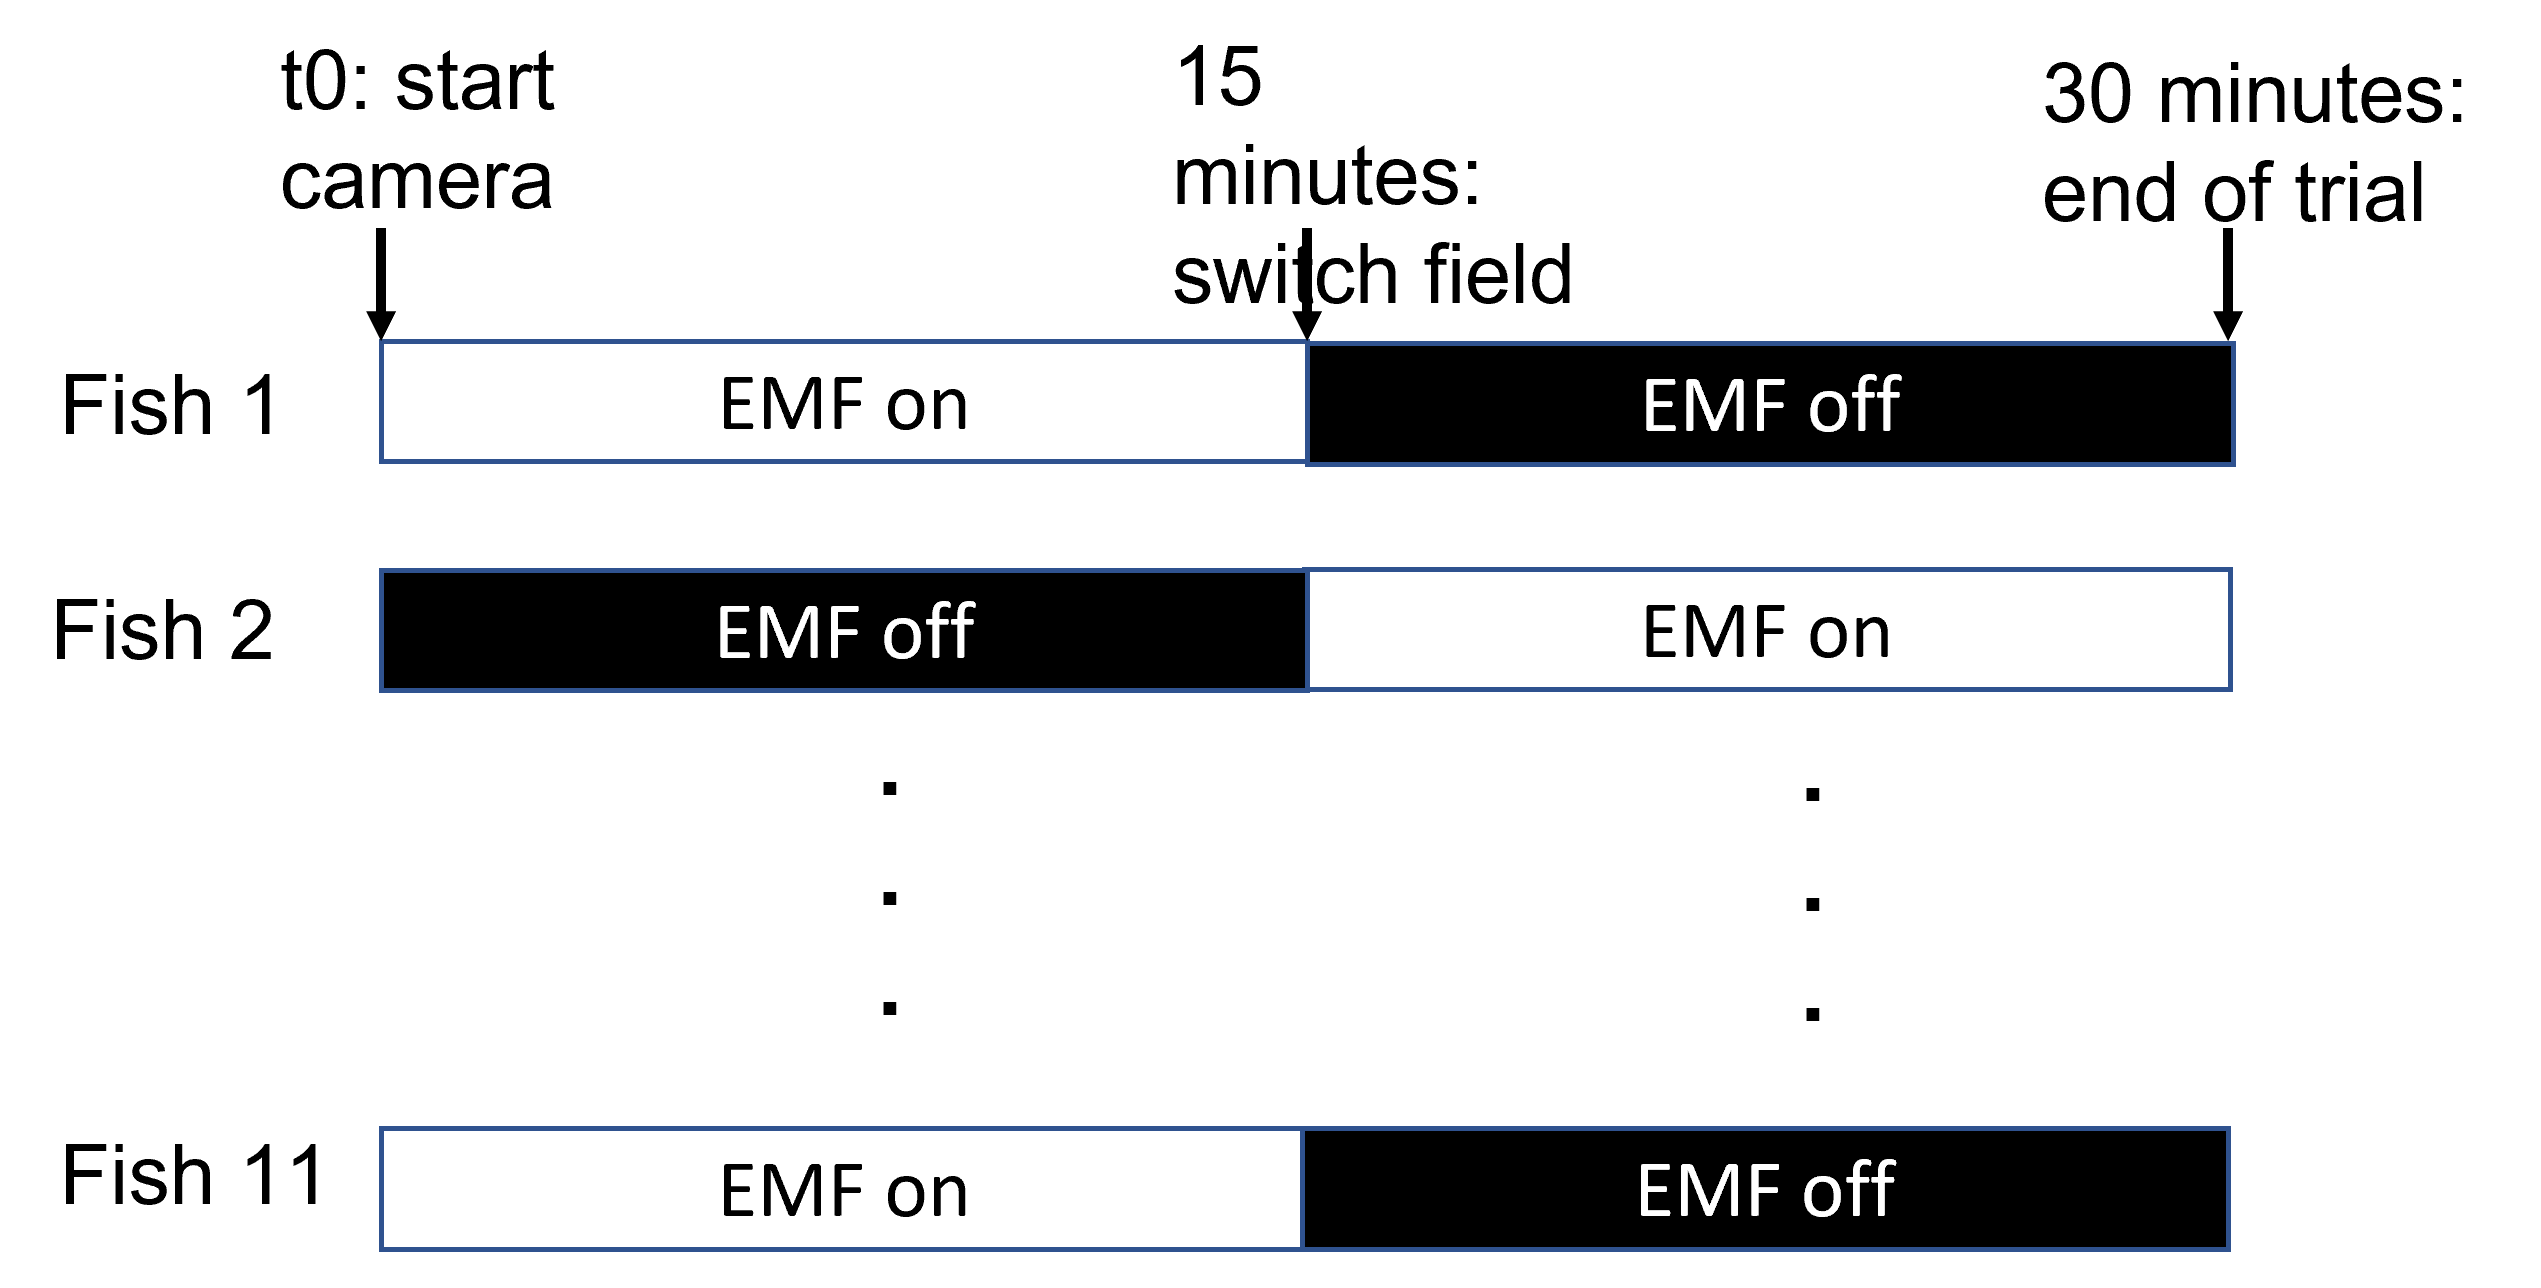 A schematic of the sampling protocol